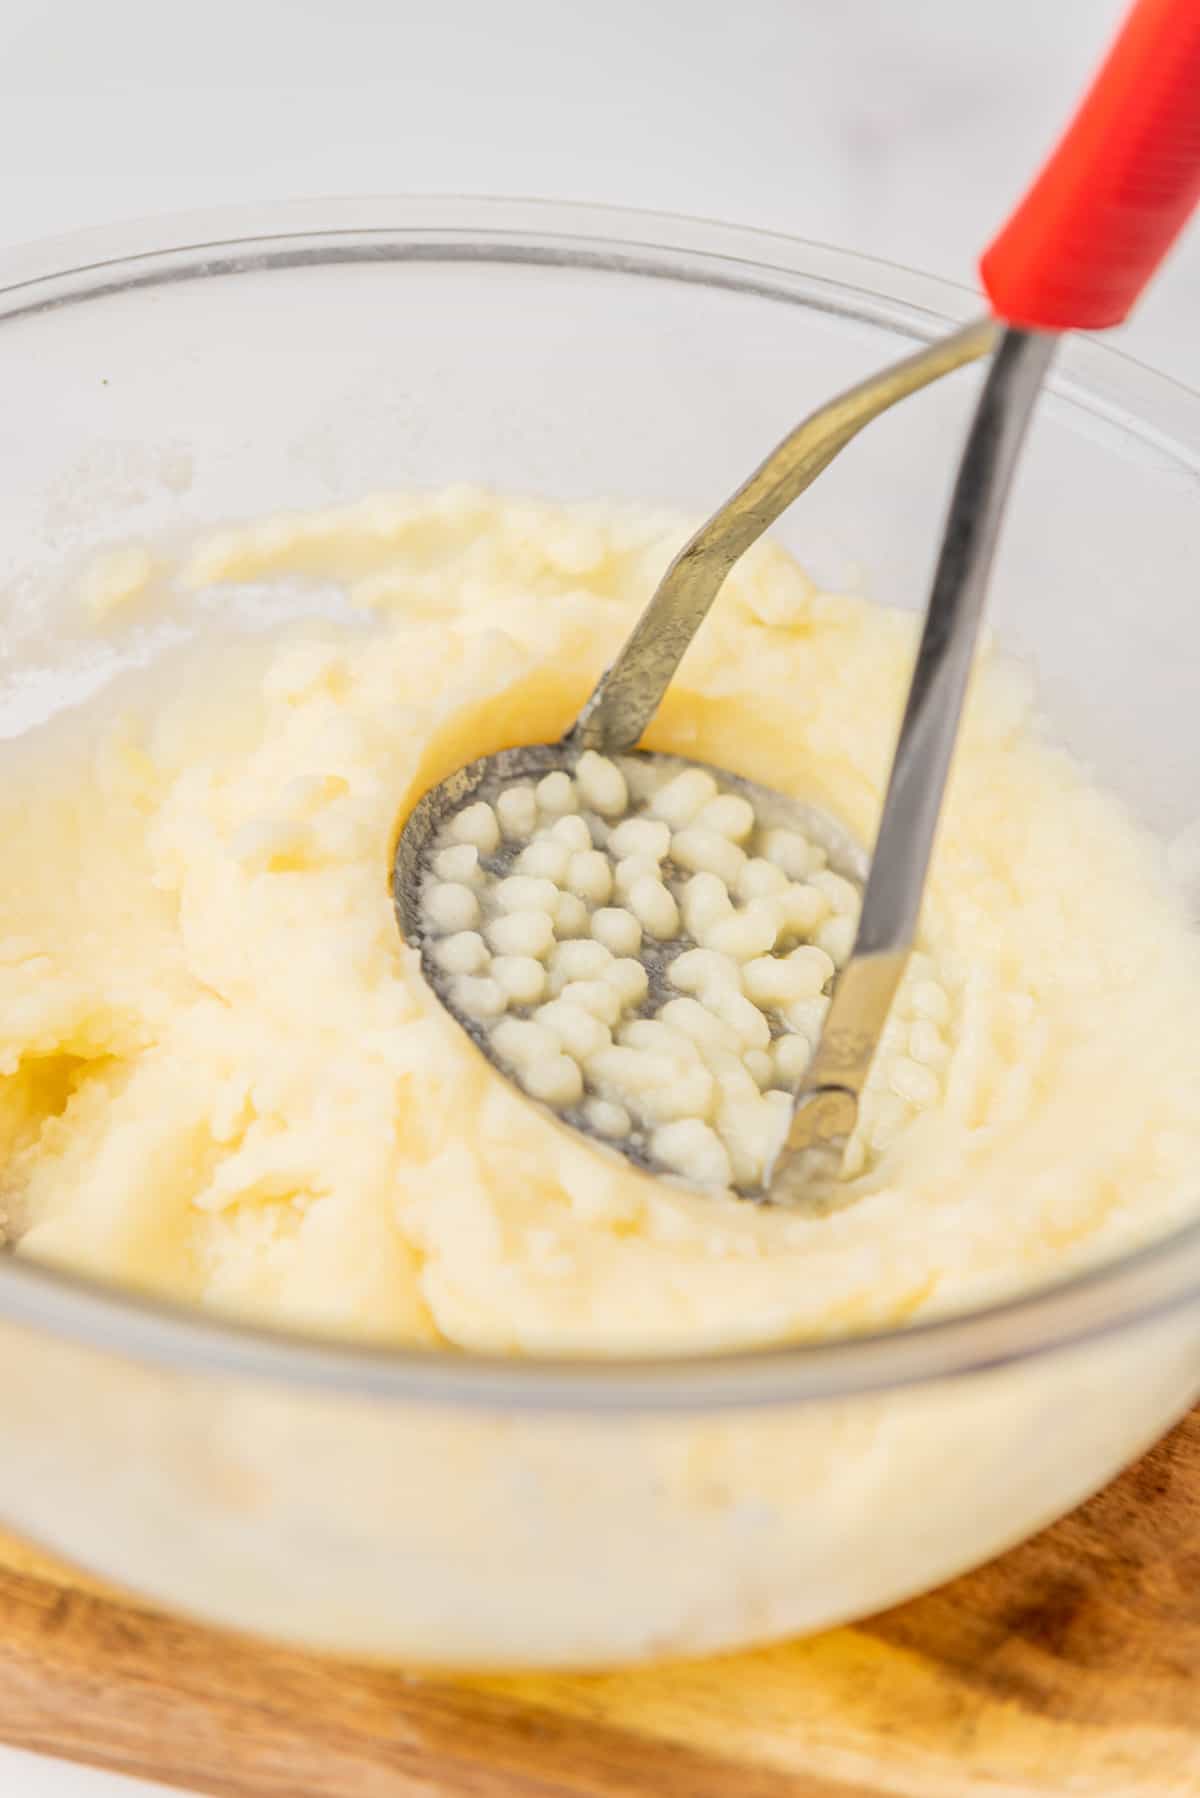 A closeup image of potatoes being mashed by a potato masher in a bowl..